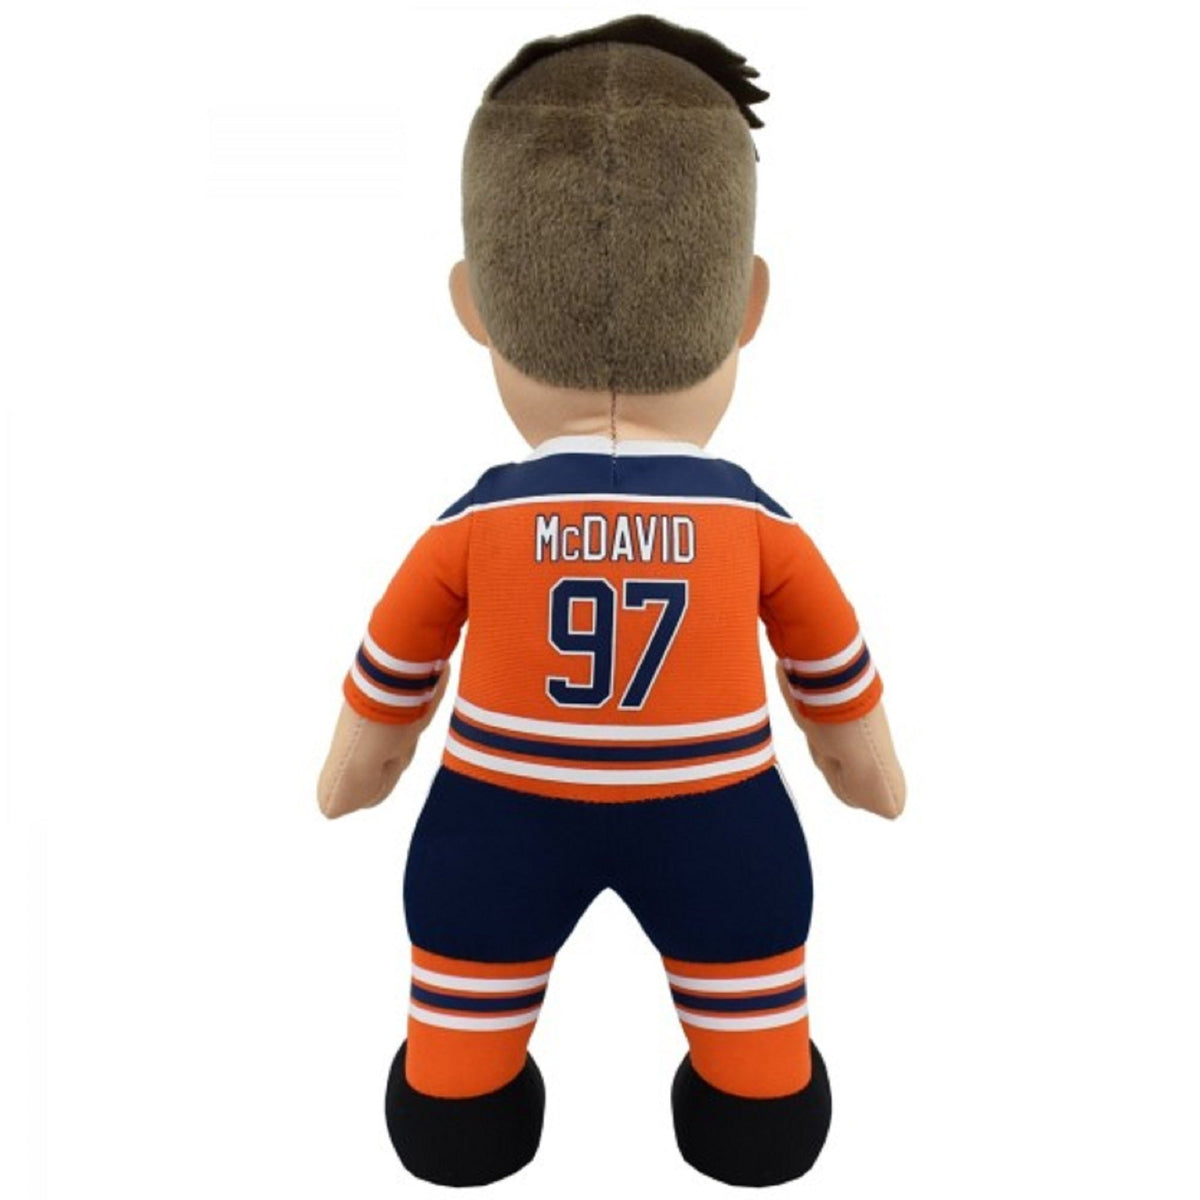 Edmonton Oilers fans need this Connor McDavid ASG bobblehead